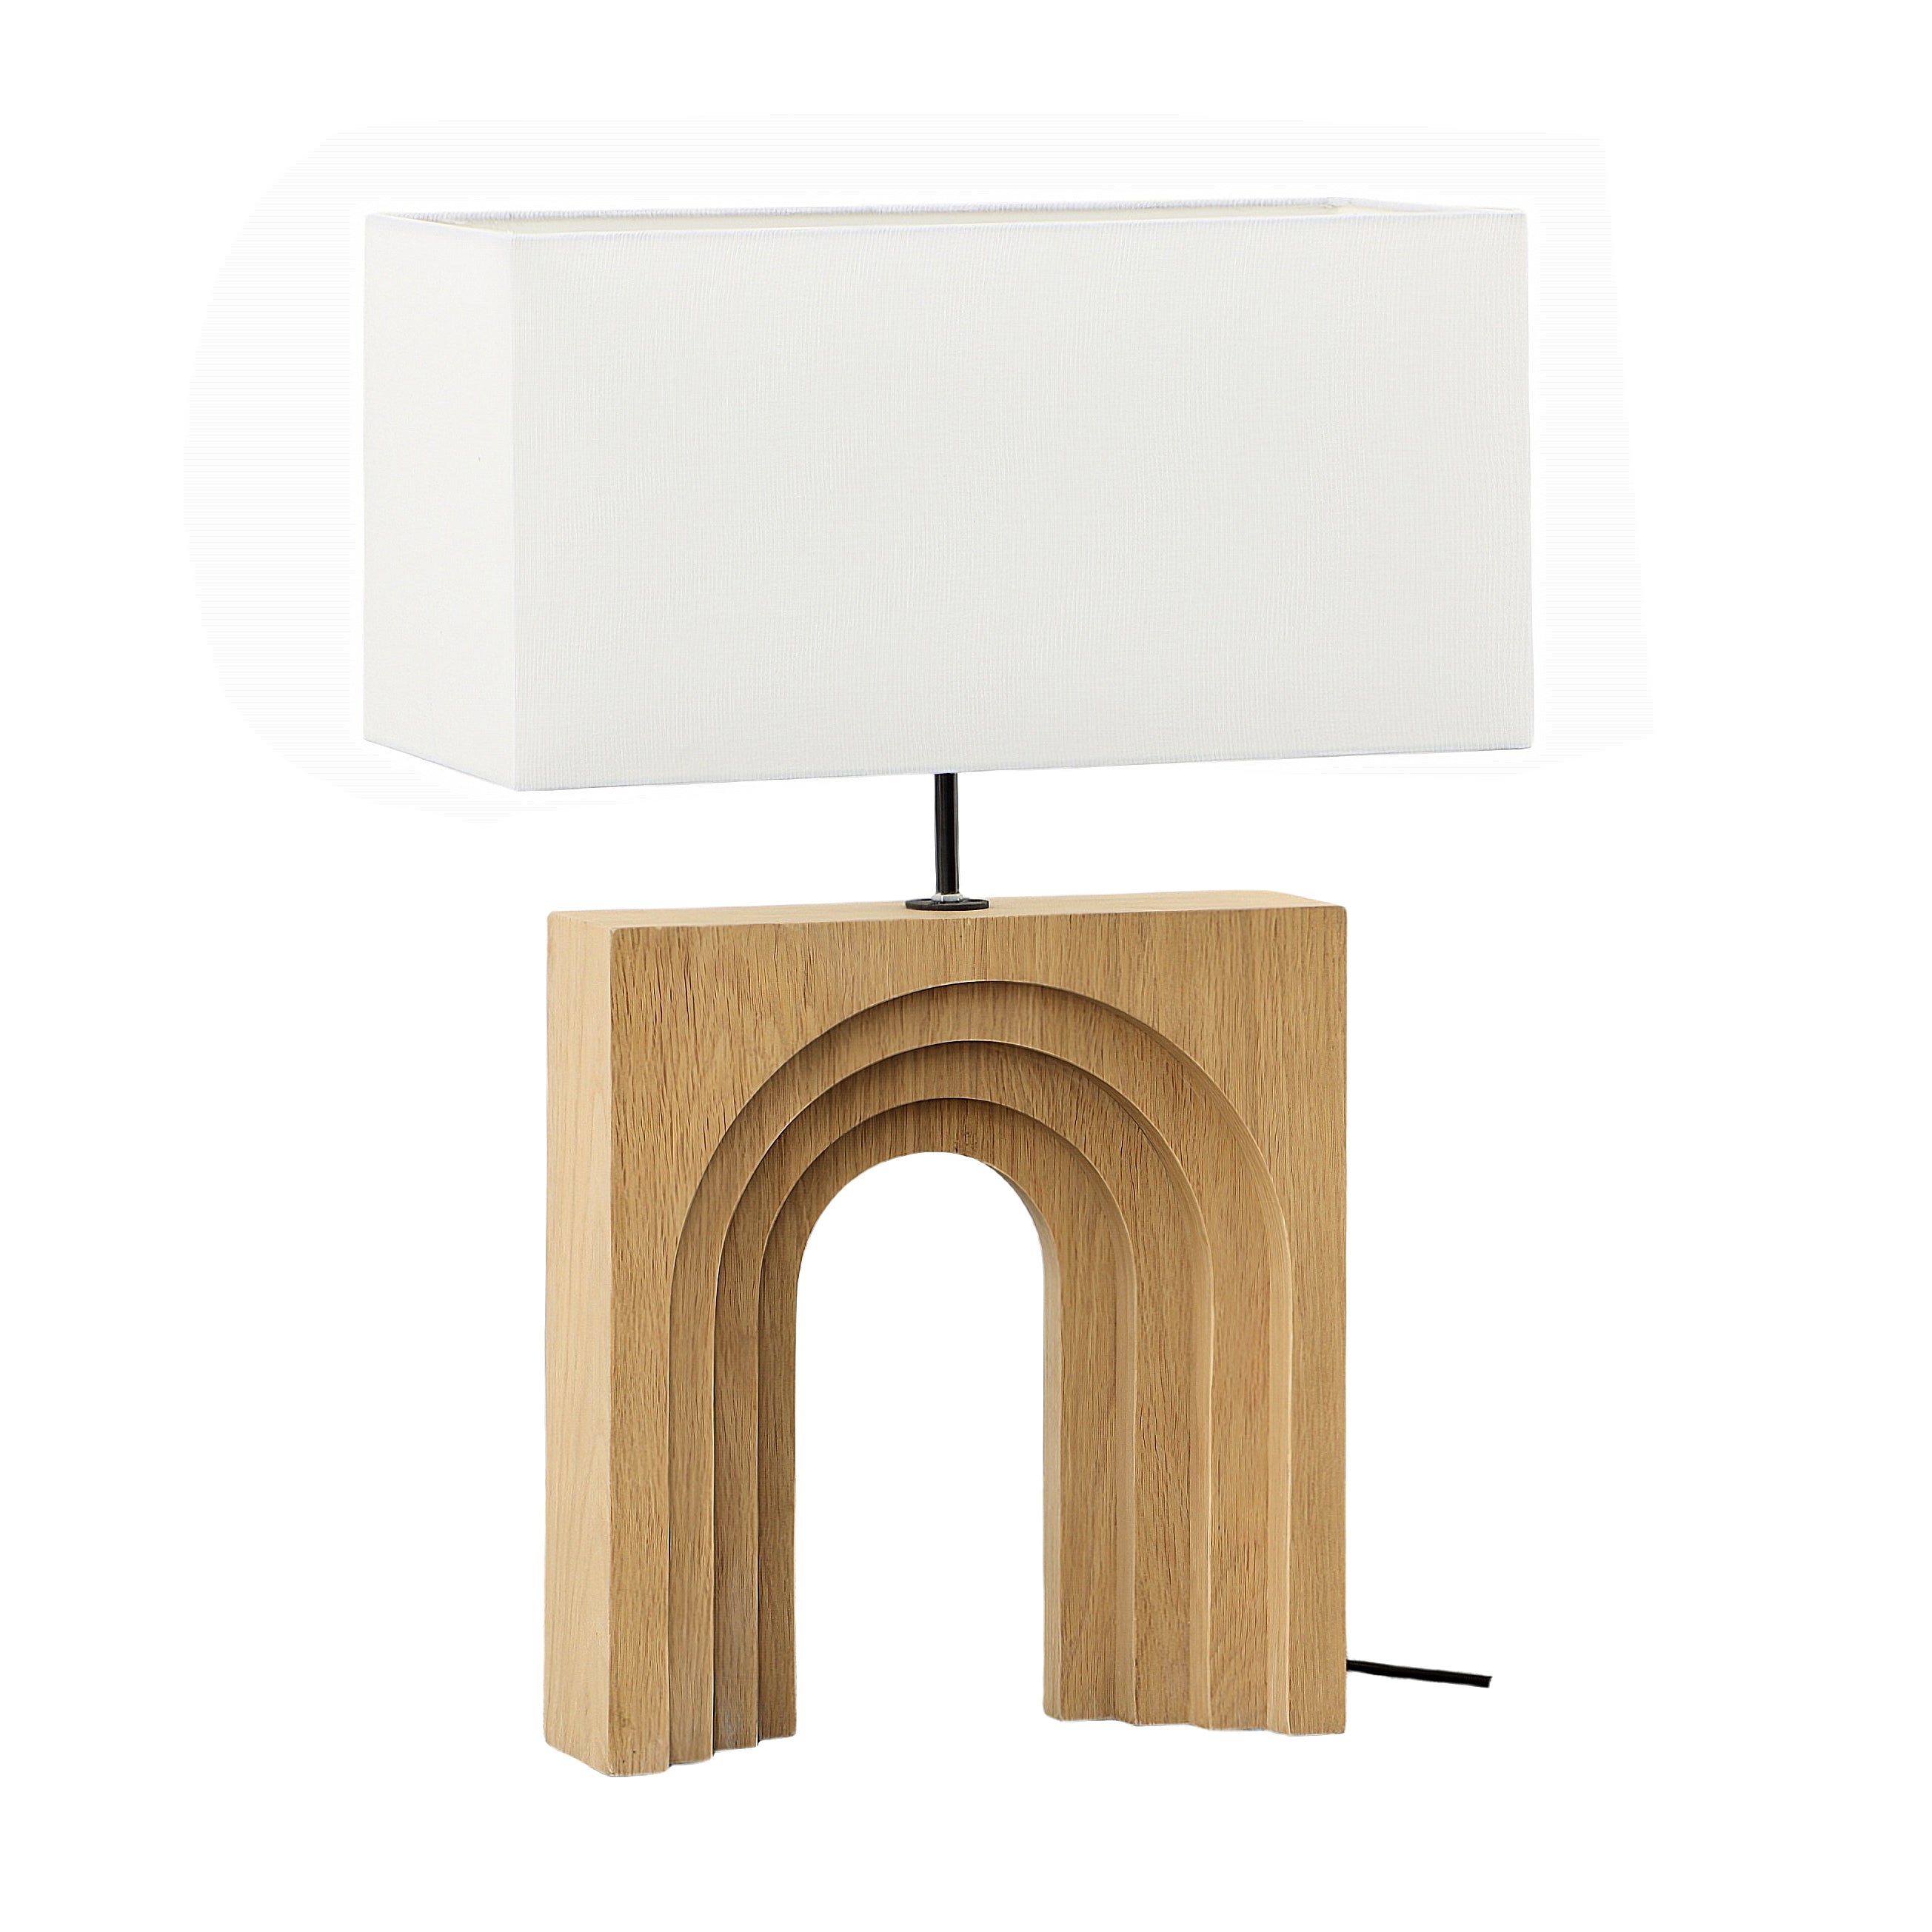 Create a calming ambiance with this modern art-inspired table lamp, displaying an ultimate combination of style and warmth for your interior space. Amethyst Home provides interior design, new home construction design consulting, vintage area rugs, and lighting in the Alpharetta metro area.